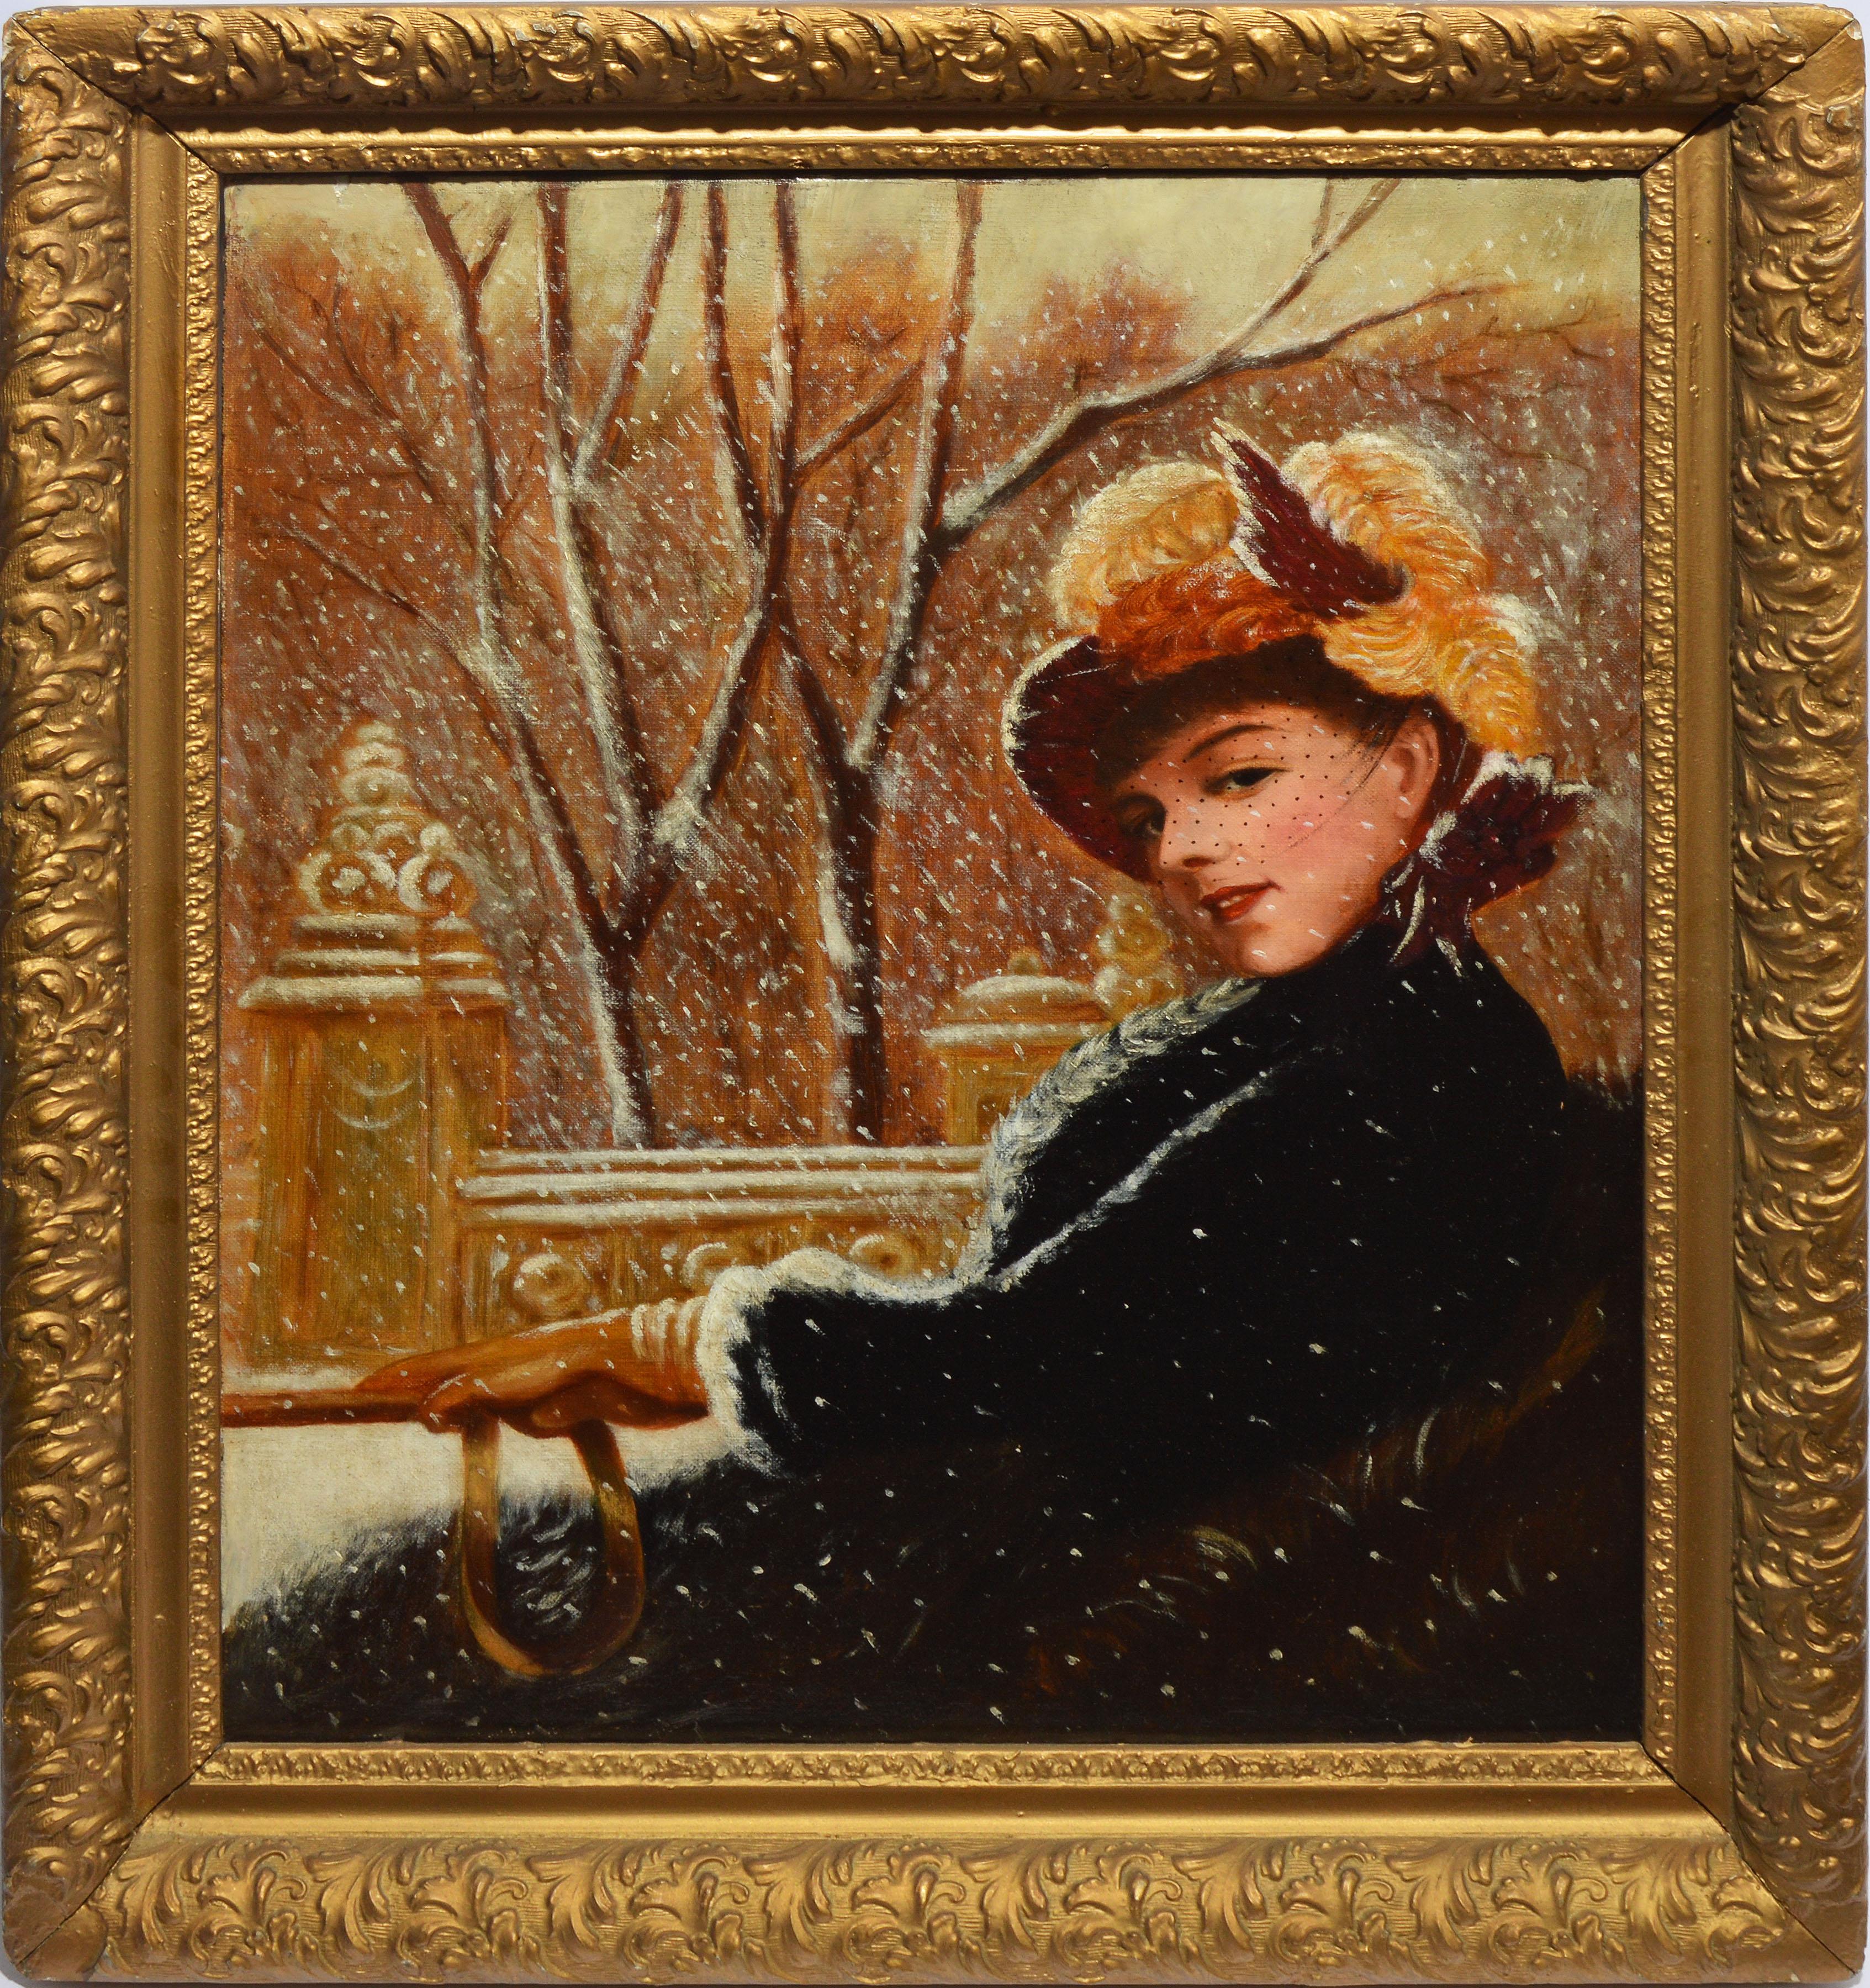 Antique American winter portrait painting by Herman Hyneman  (1849 - 1907).  Oil on canvas, circa 1880.  Unsigned. 
 Displayed in a giltwood frame.  Image, 16"L x 20"H, overall 20"L x 24"H.